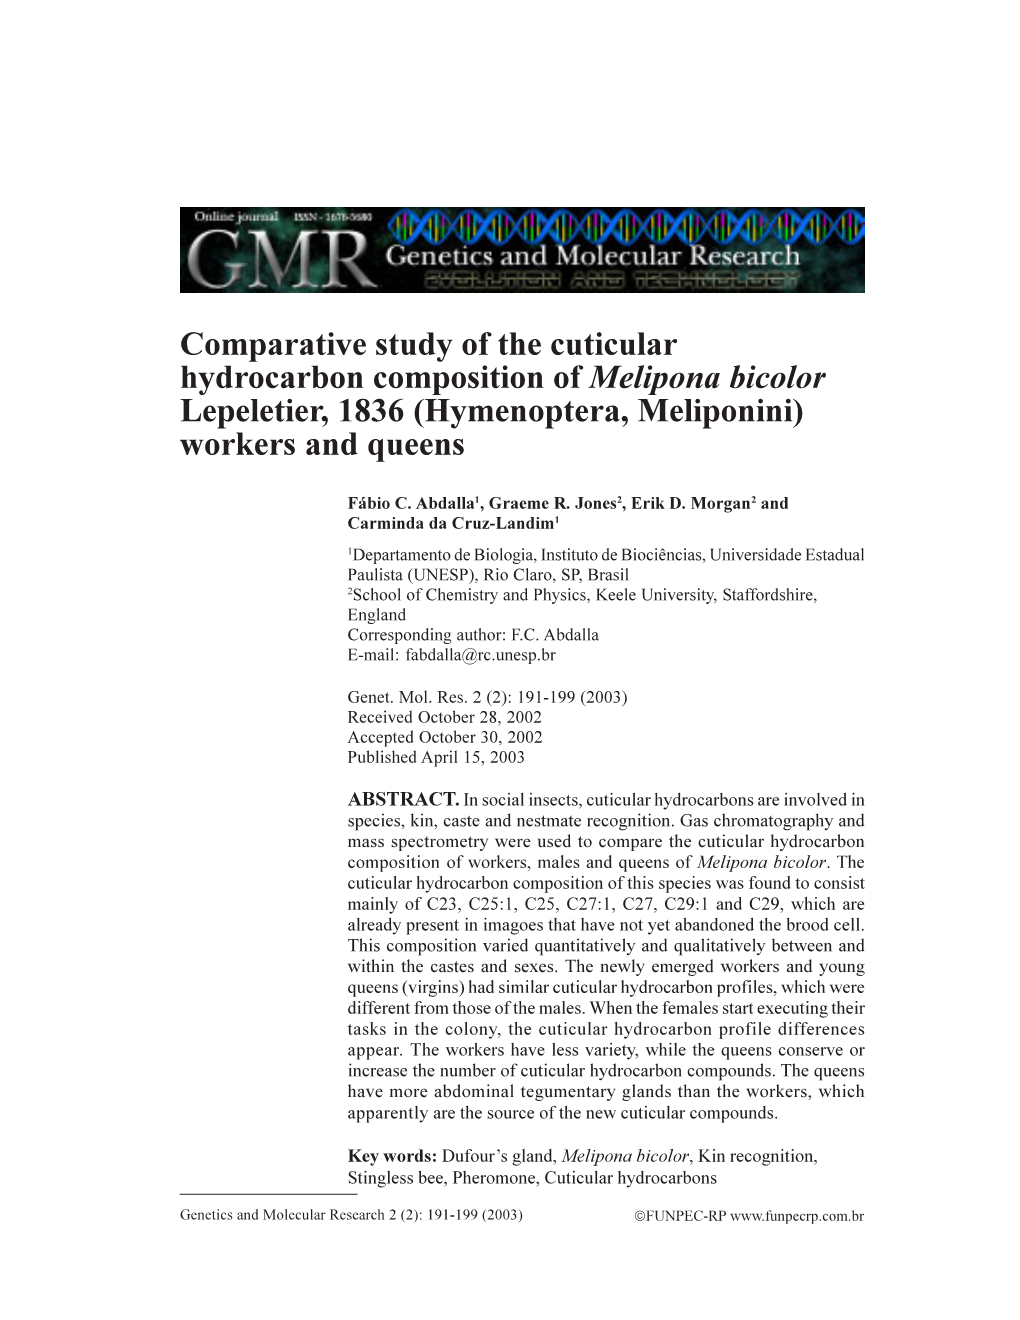 Comparative Study of the Cuticular Hydrocarbon Composition of Melipona Bicolor Lepeletier, 1836 (Hymenoptera, Meliponini) Workers and Queens